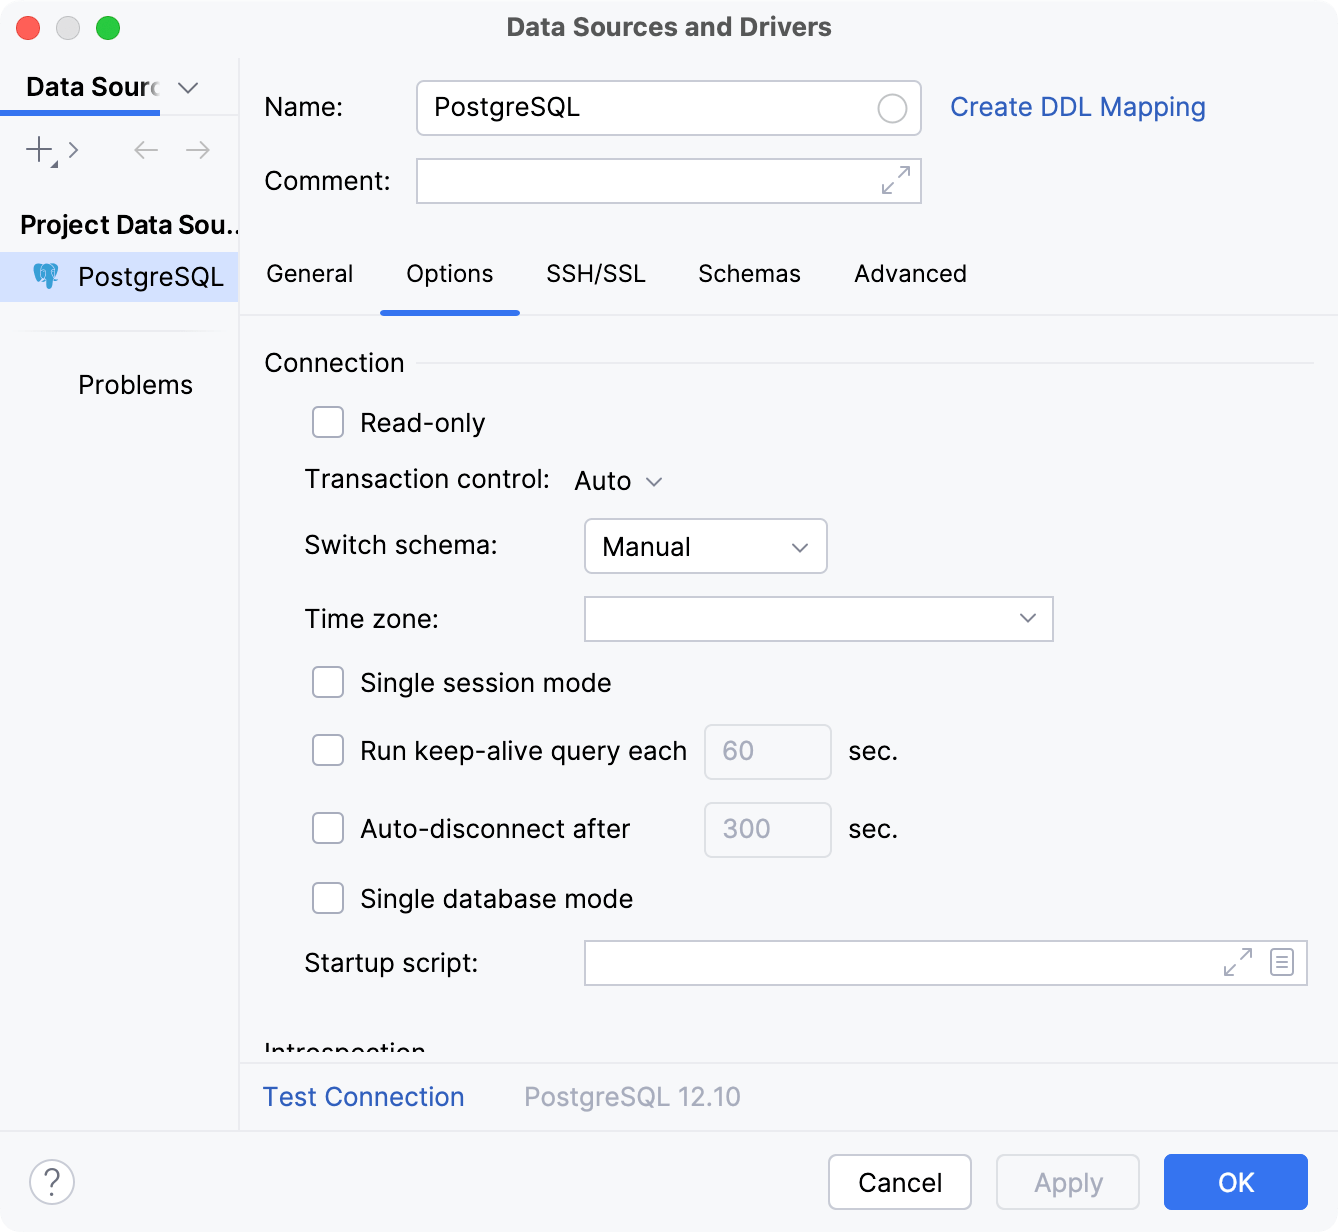 Data Source and Drivers dialog: Options tab of Data Sources settings